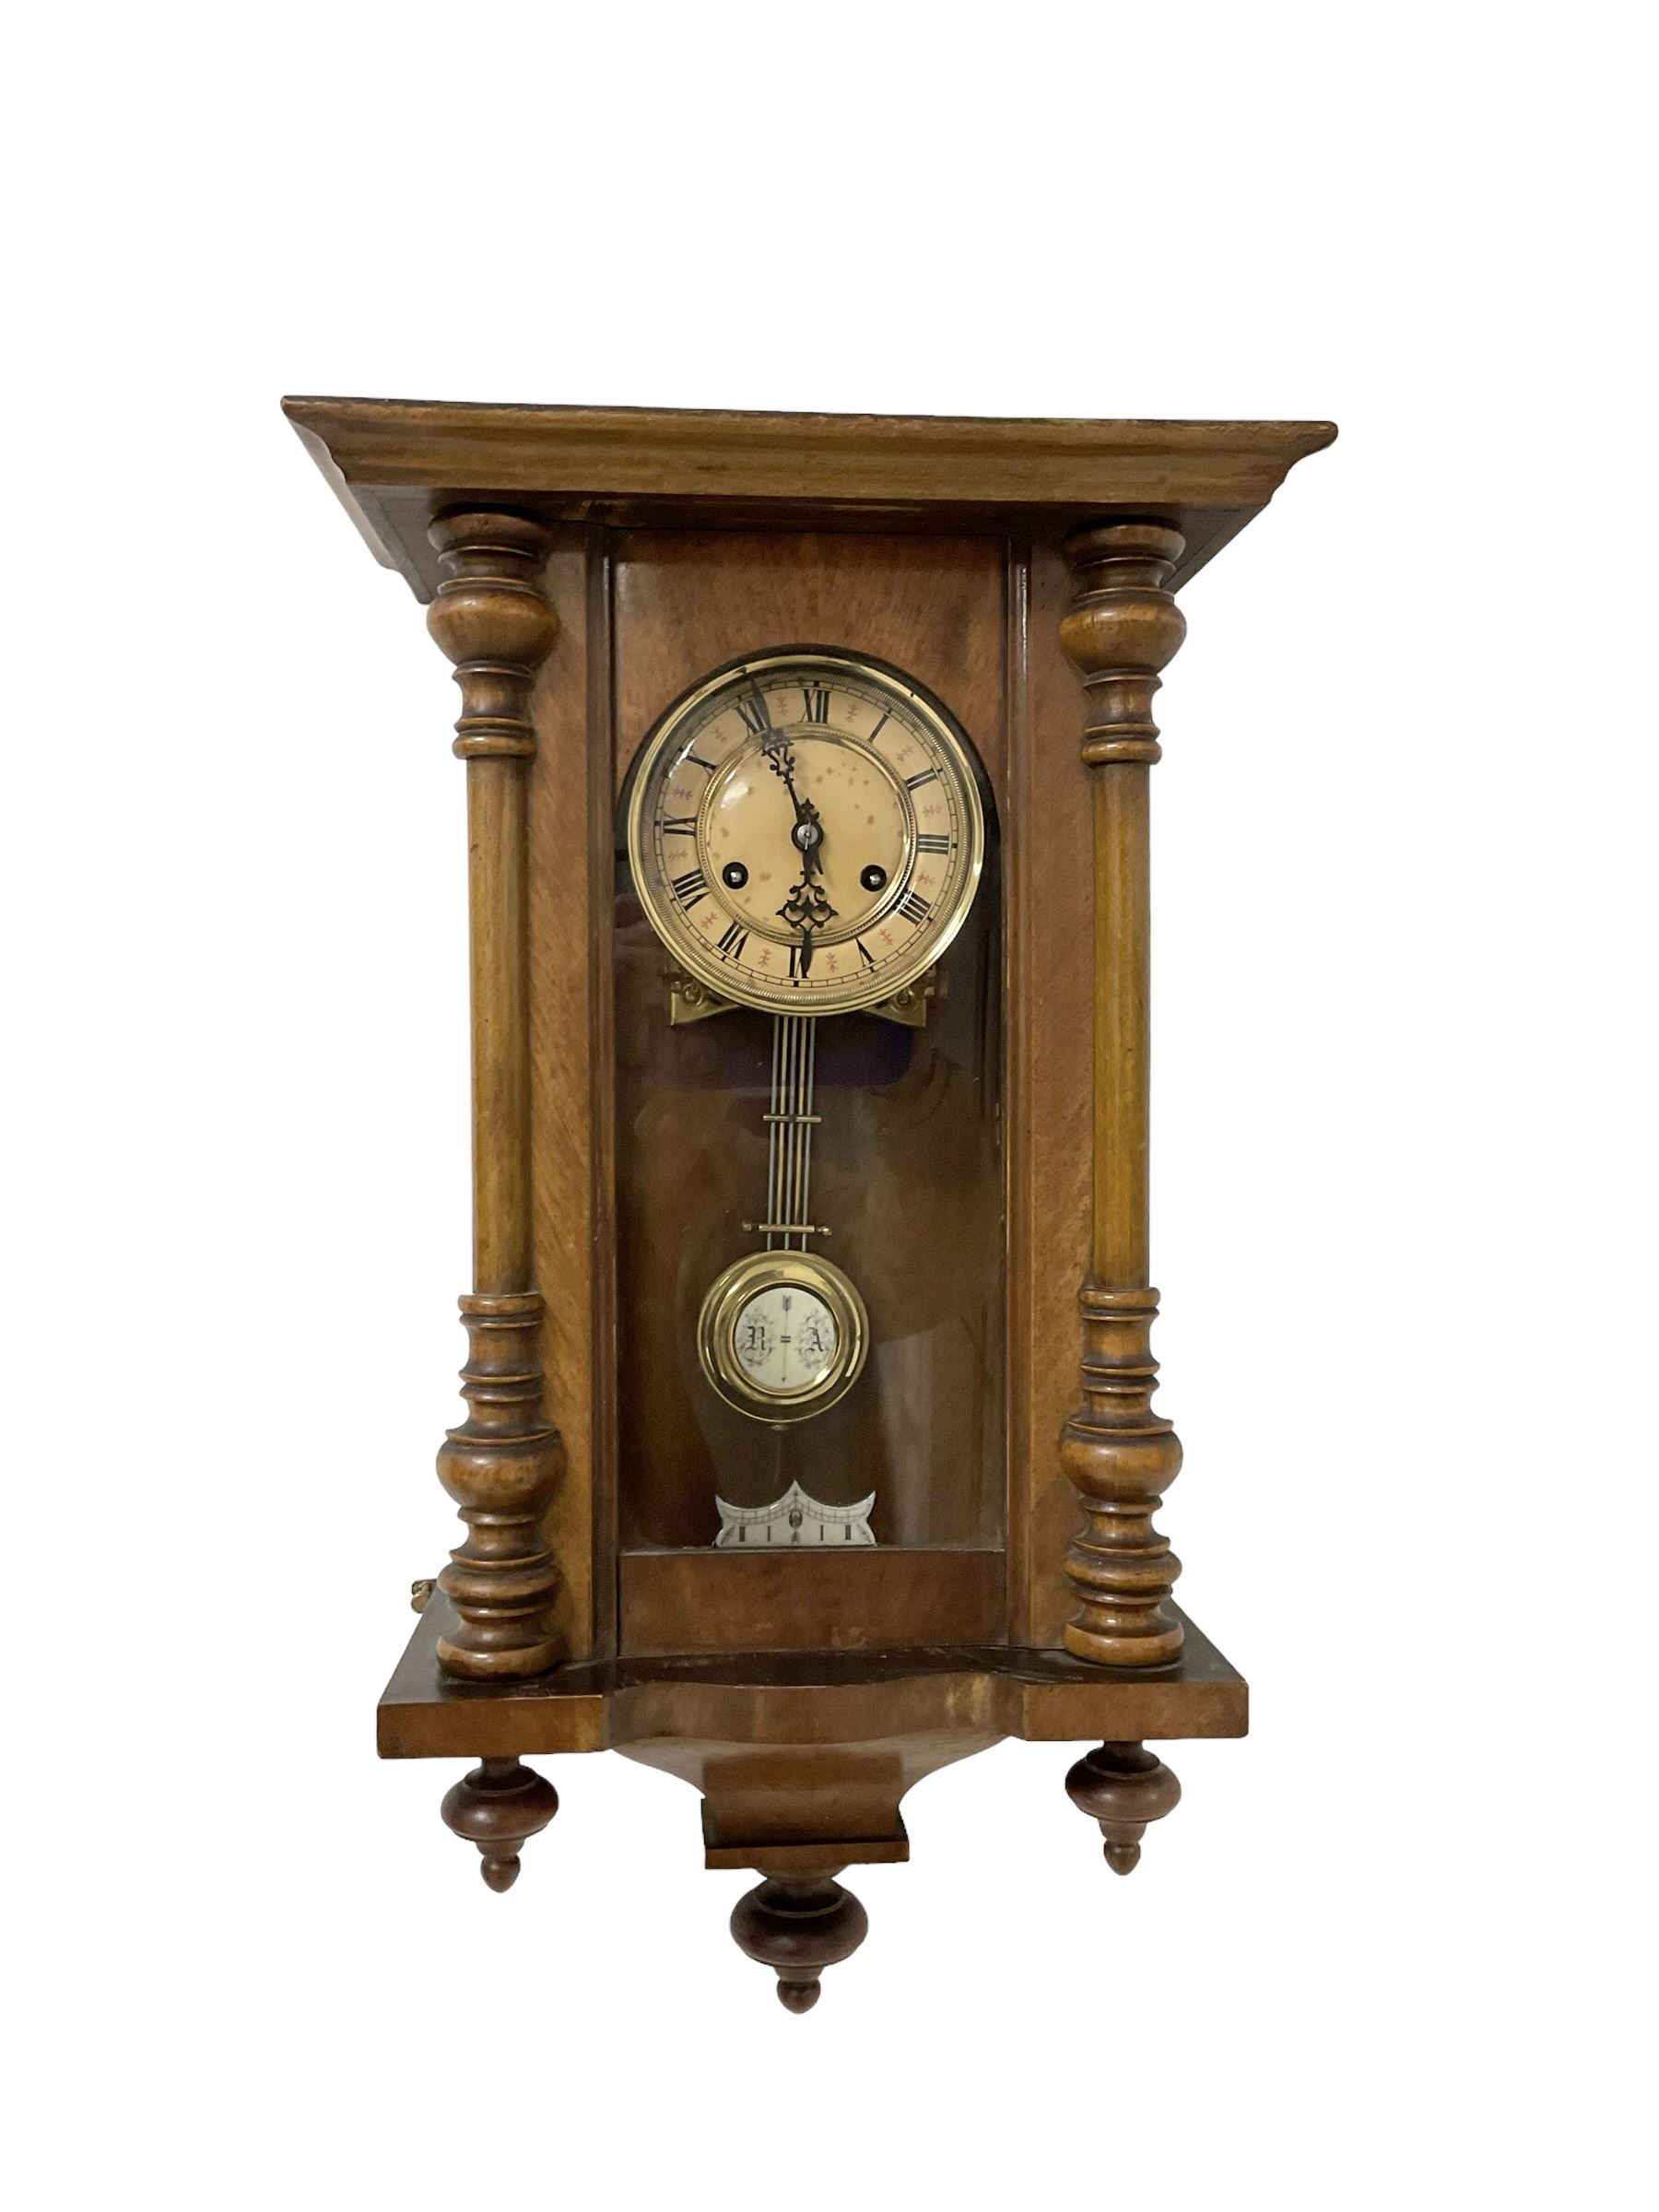 German - 19th-century spring driven wall clock with pendulum and key.